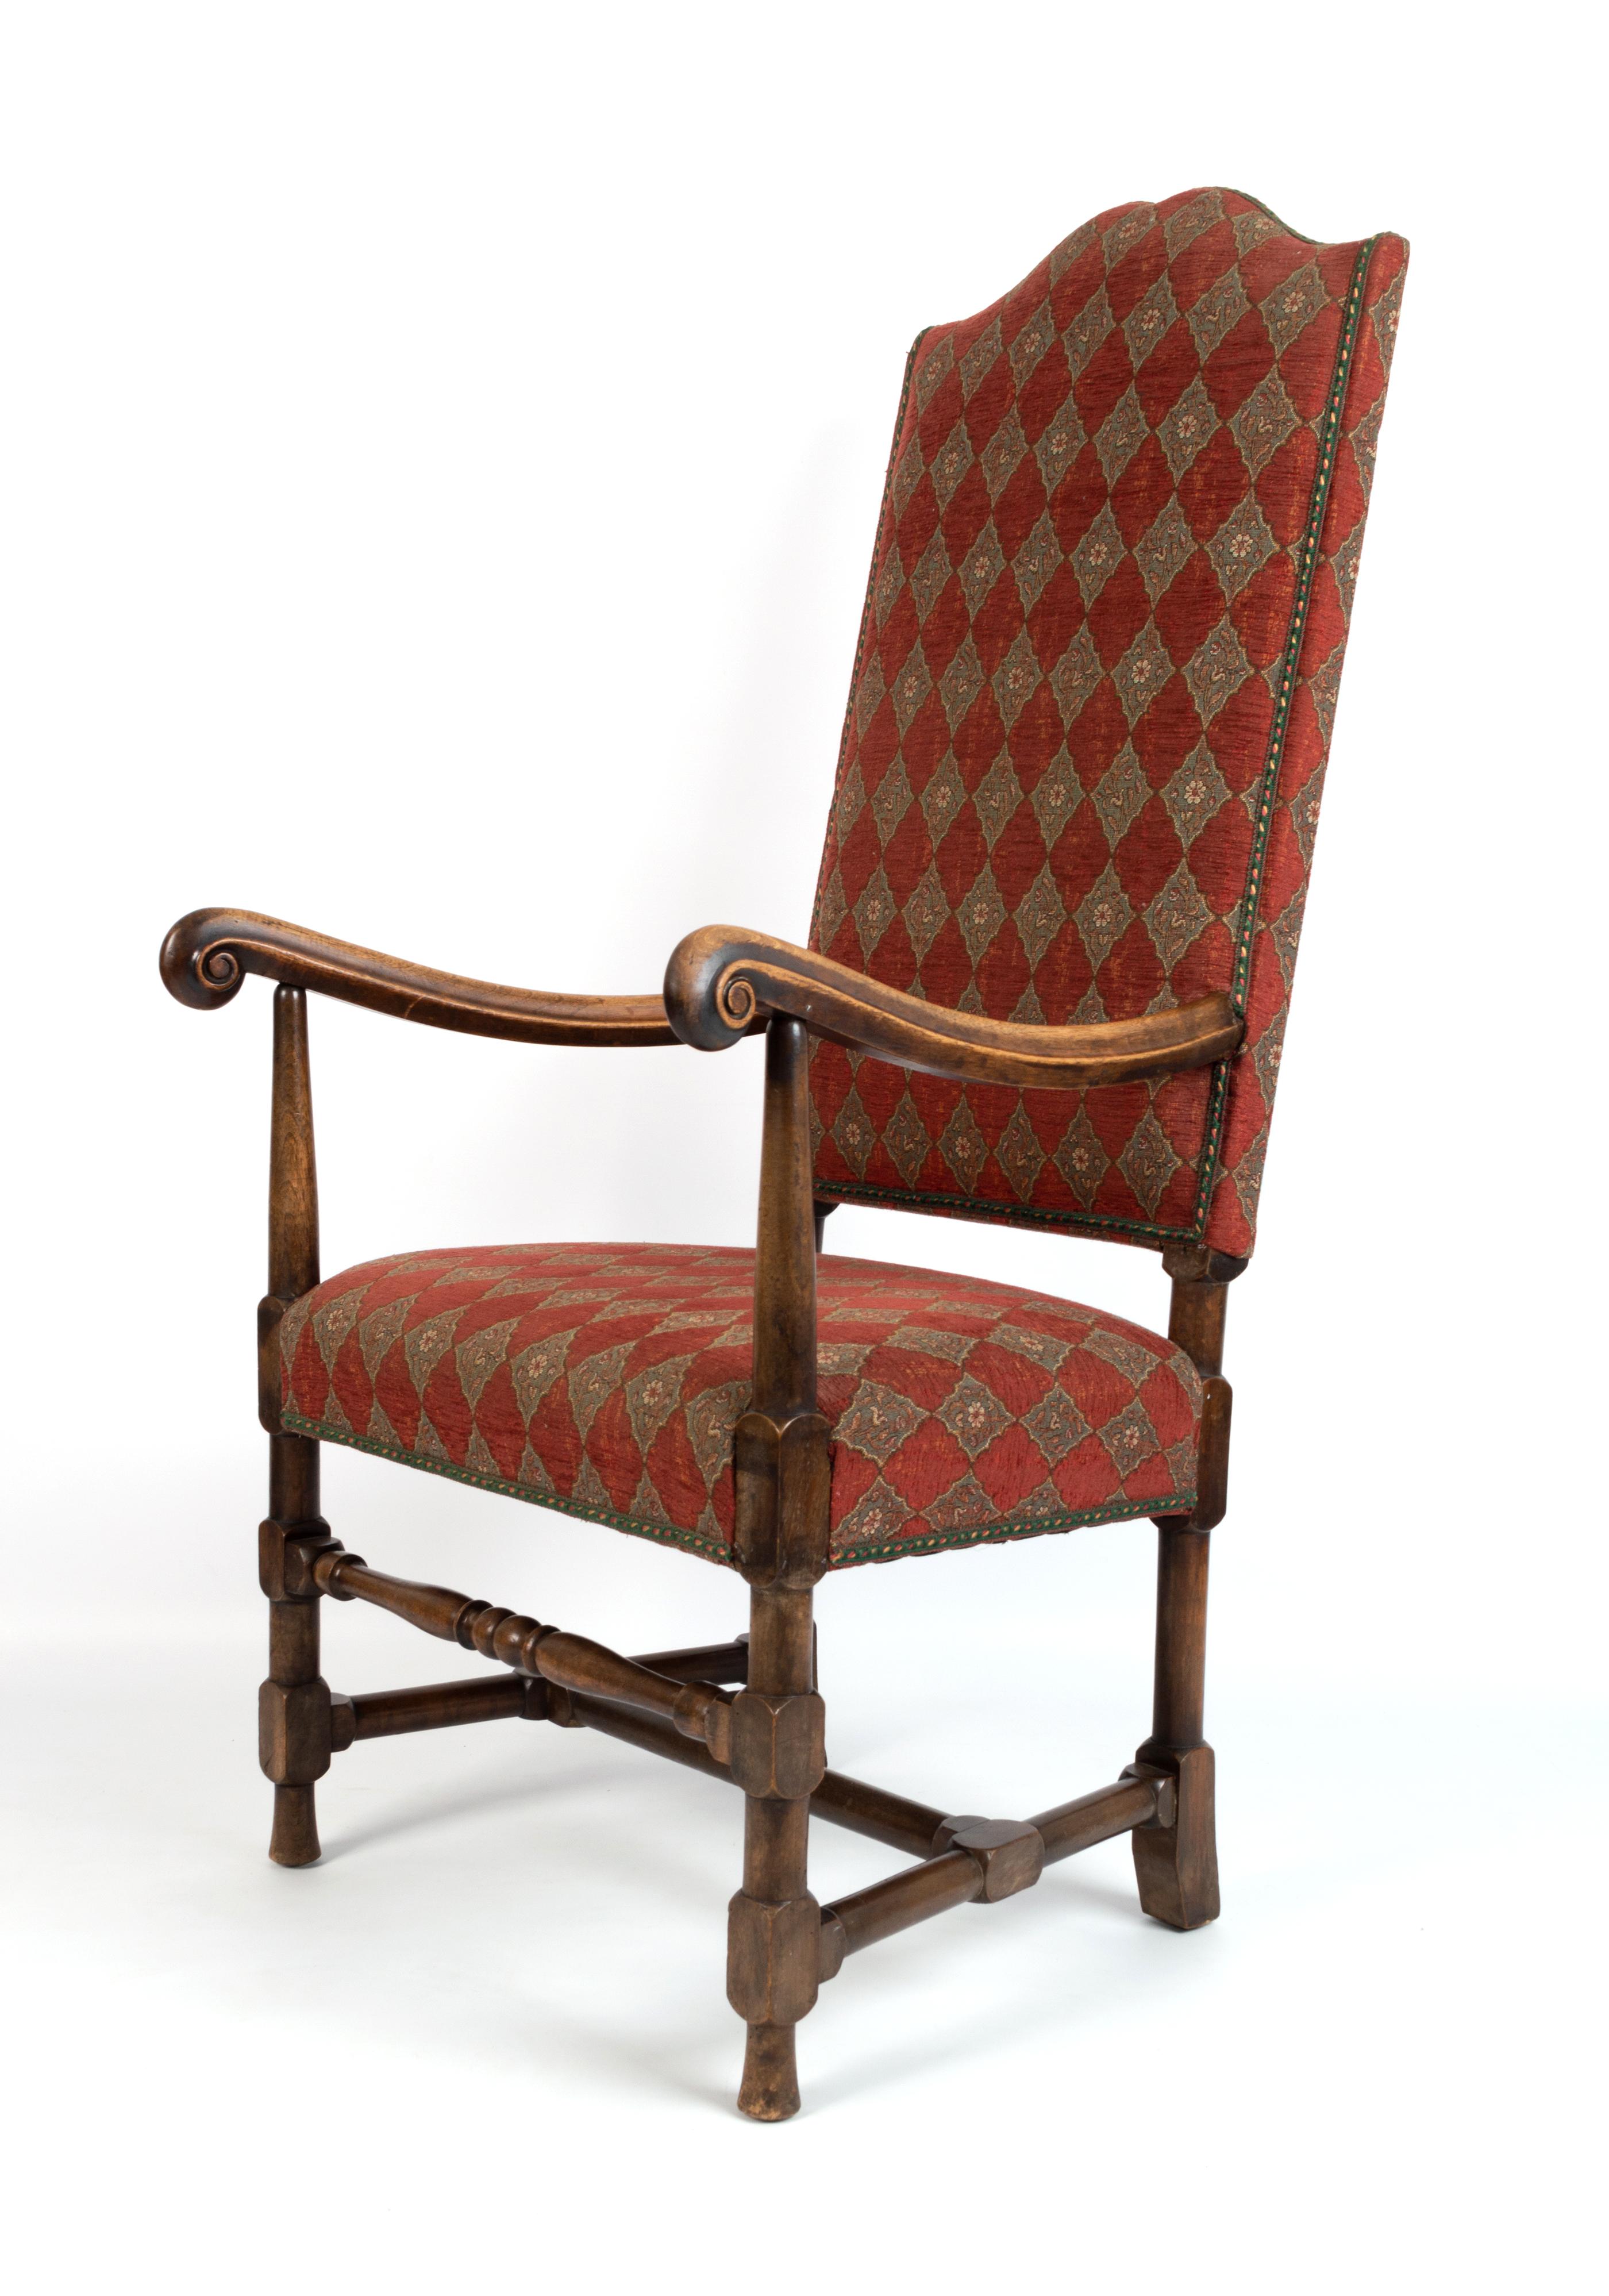 English 19th Century Charles II Style Upholstered High Back Elbow Chair For Sale 3